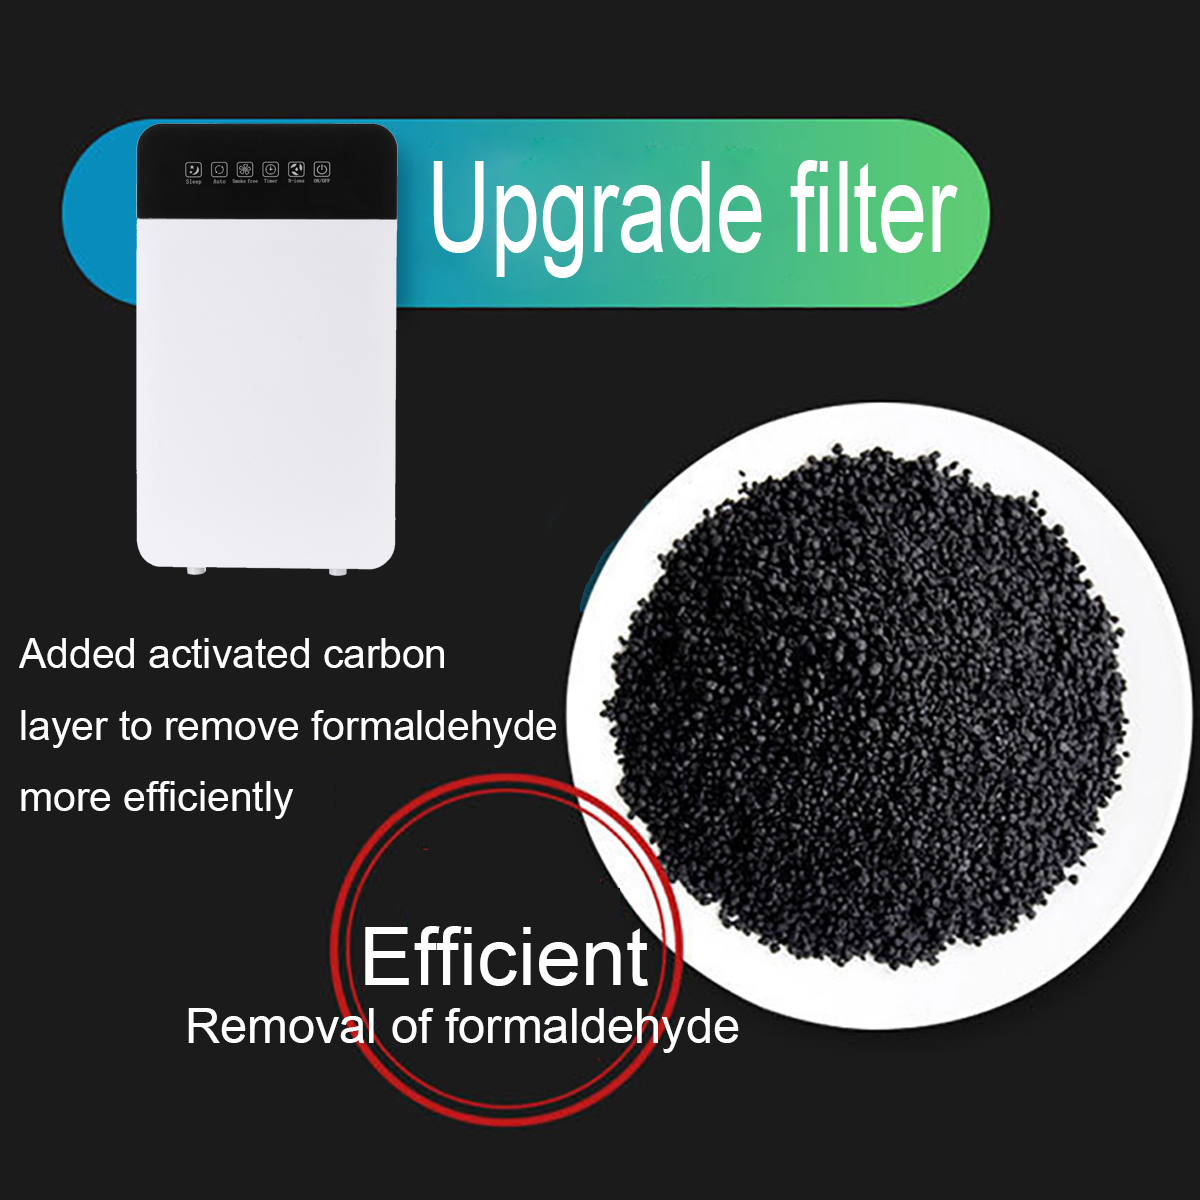 Air-Purifier-Negative-Ions-Air-Cleaner-Remove-Formaldehyde-PM25-W-HEPA-Filter-1628421-7